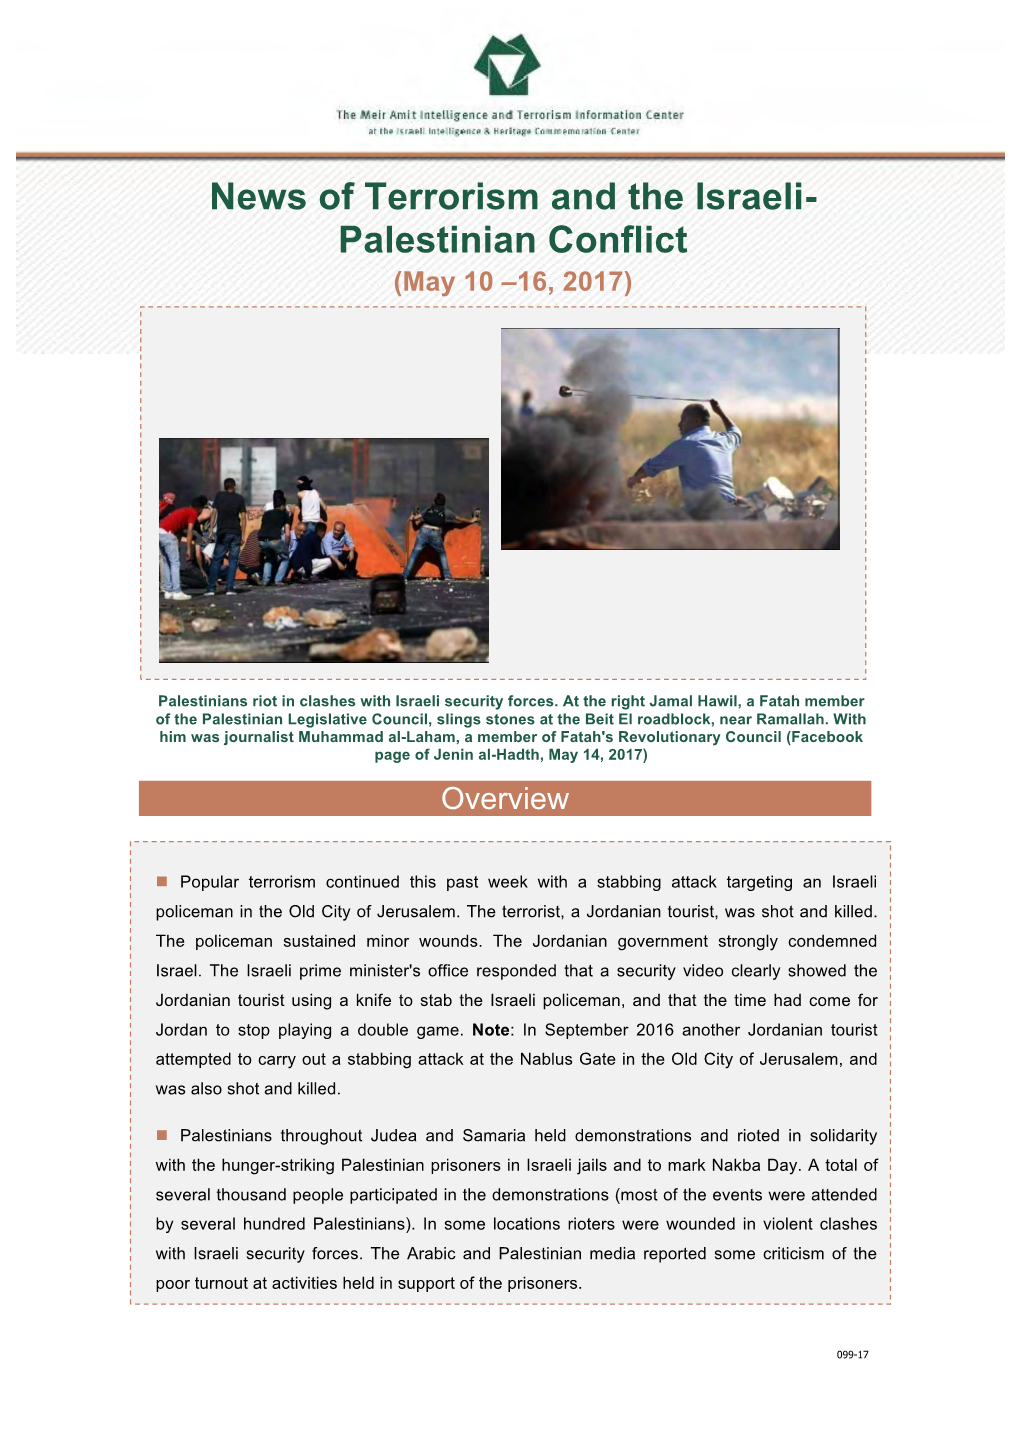 News of Terrorism and the Israeli-Palestinian Conflict (May 10